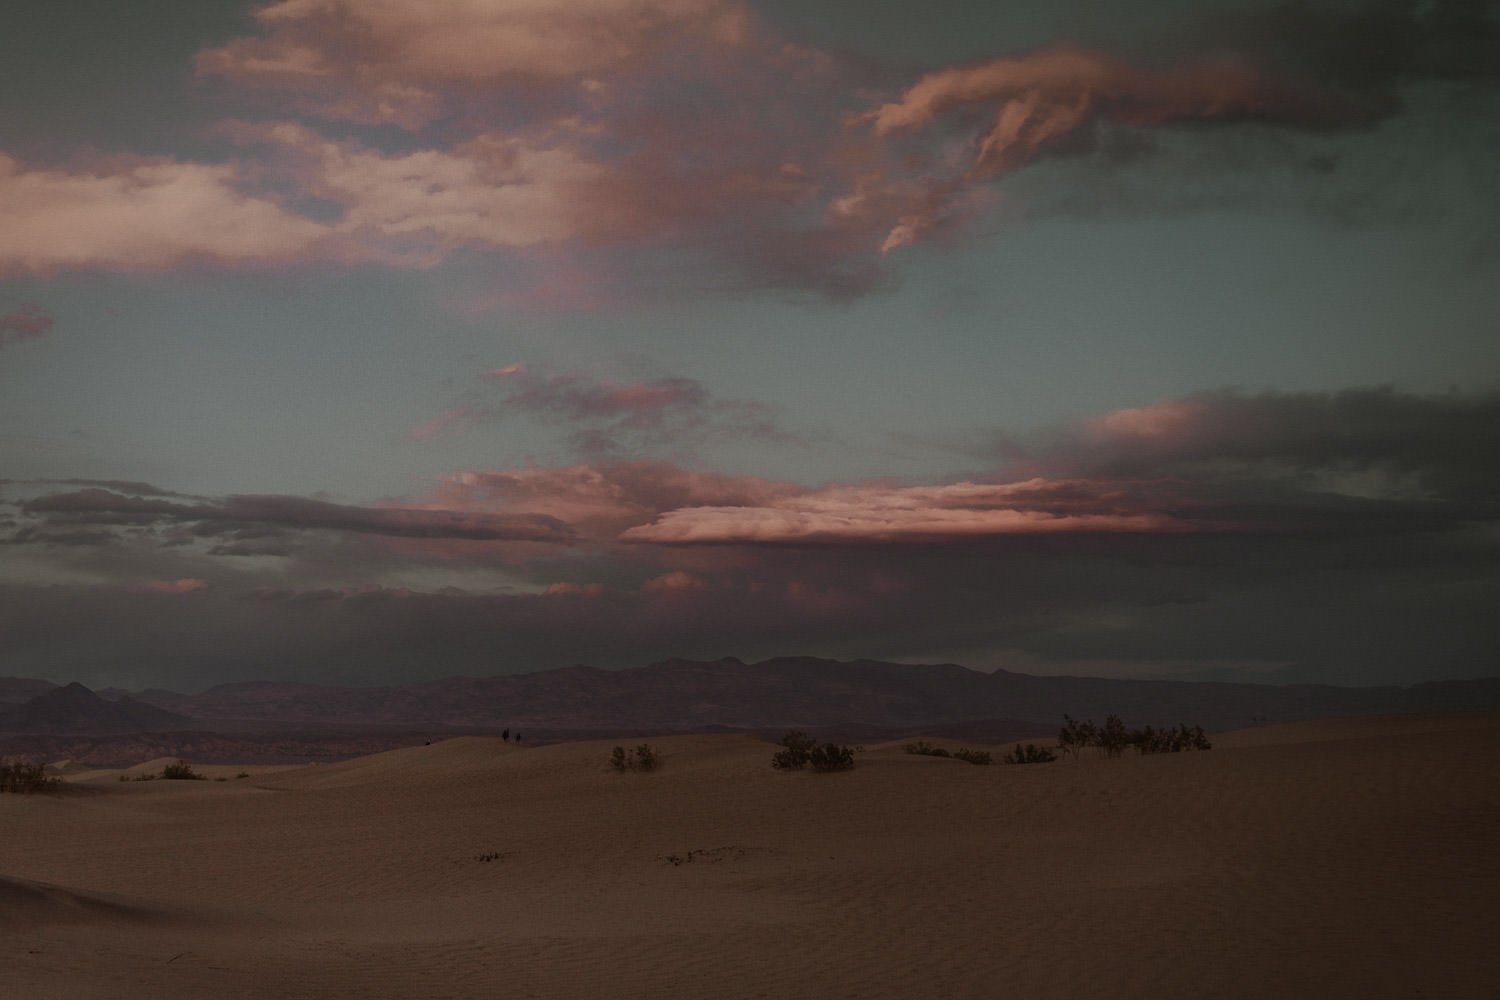 Amazing desert sunset with pink clouds, blue skies, and purple mountains was the best ending to an intimate elopement